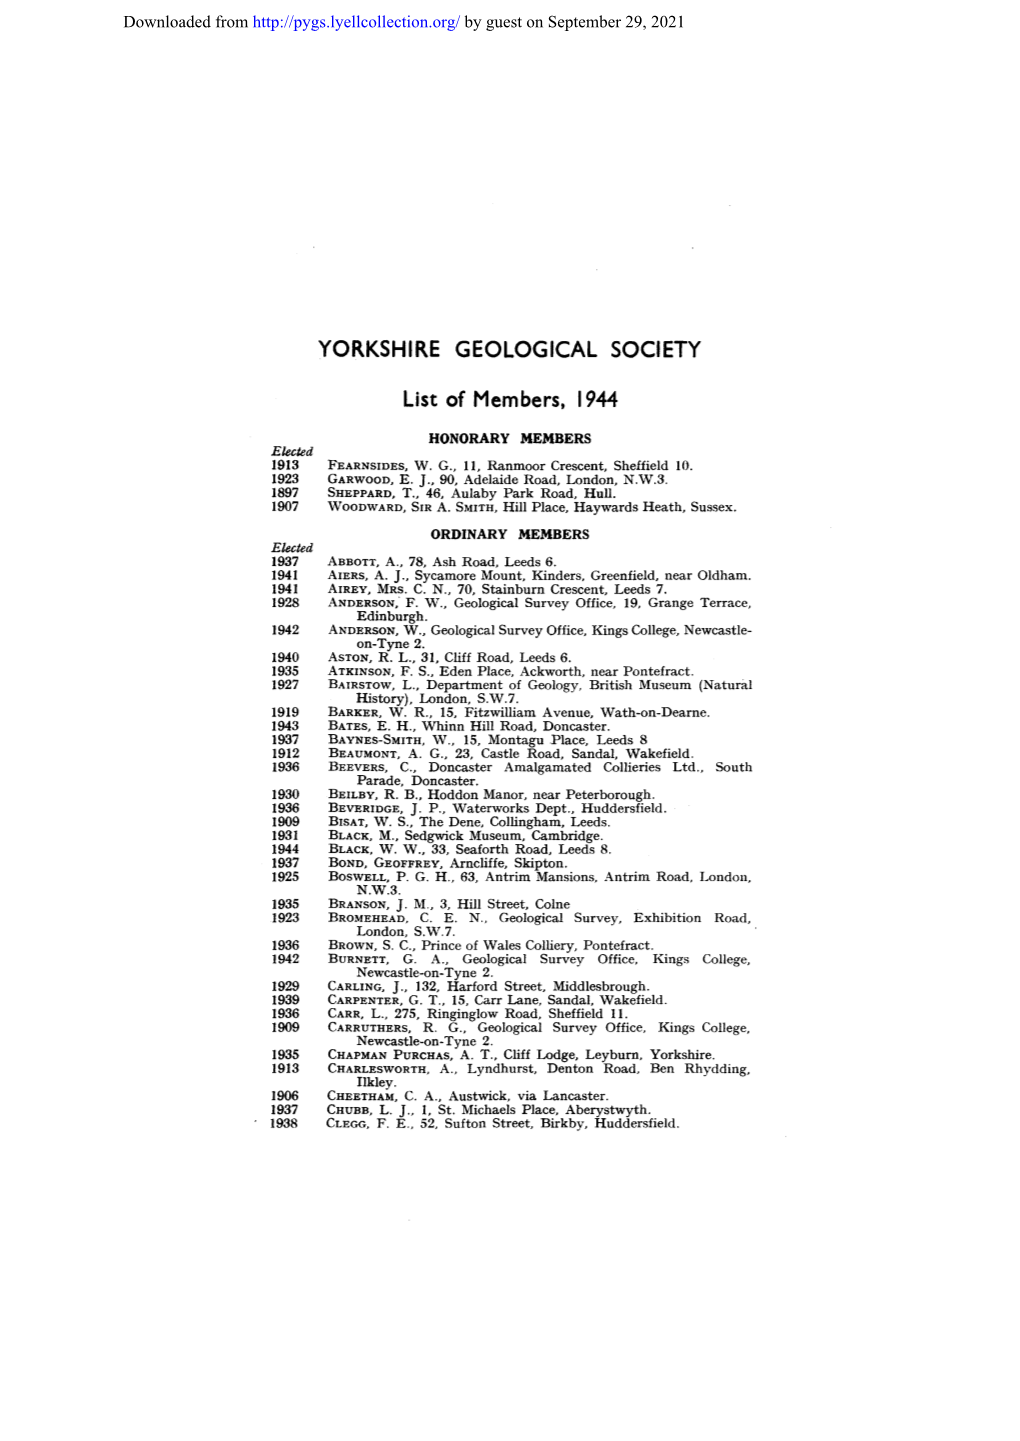 YORKSHIRE GEOLOGICAL SOCIETY List of Members, 1944